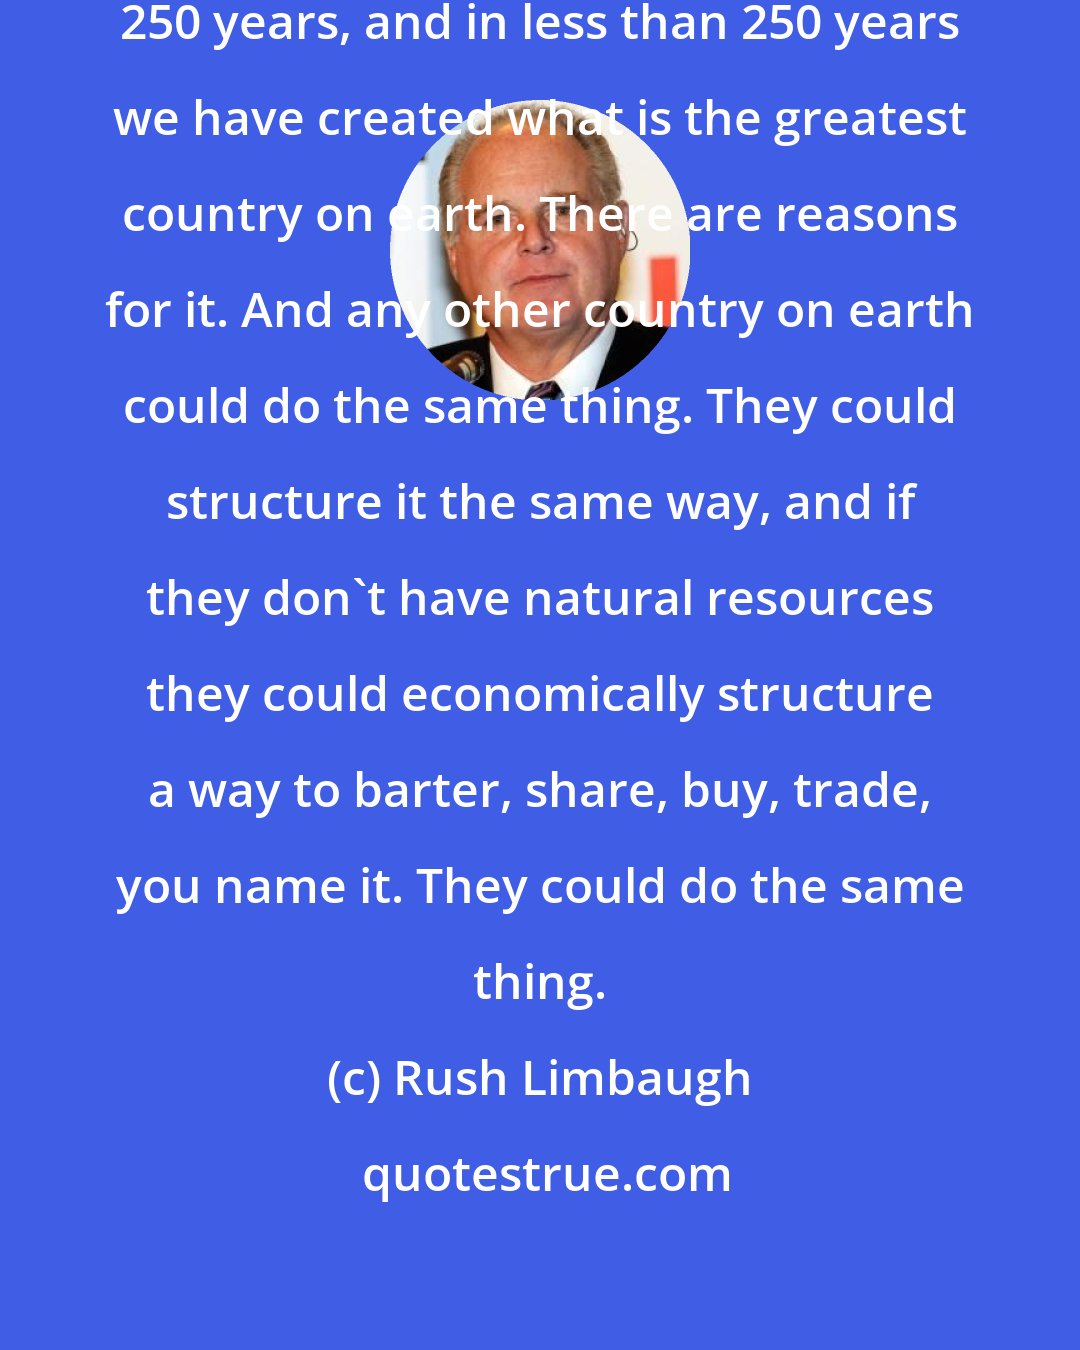 Rush Limbaugh: America has been around less than 250 years, and in less than 250 years we have created what is the greatest country on earth. There are reasons for it. And any other country on earth could do the same thing. They could structure it the same way, and if they don't have natural resources they could economically structure a way to barter, share, buy, trade, you name it. They could do the same thing.